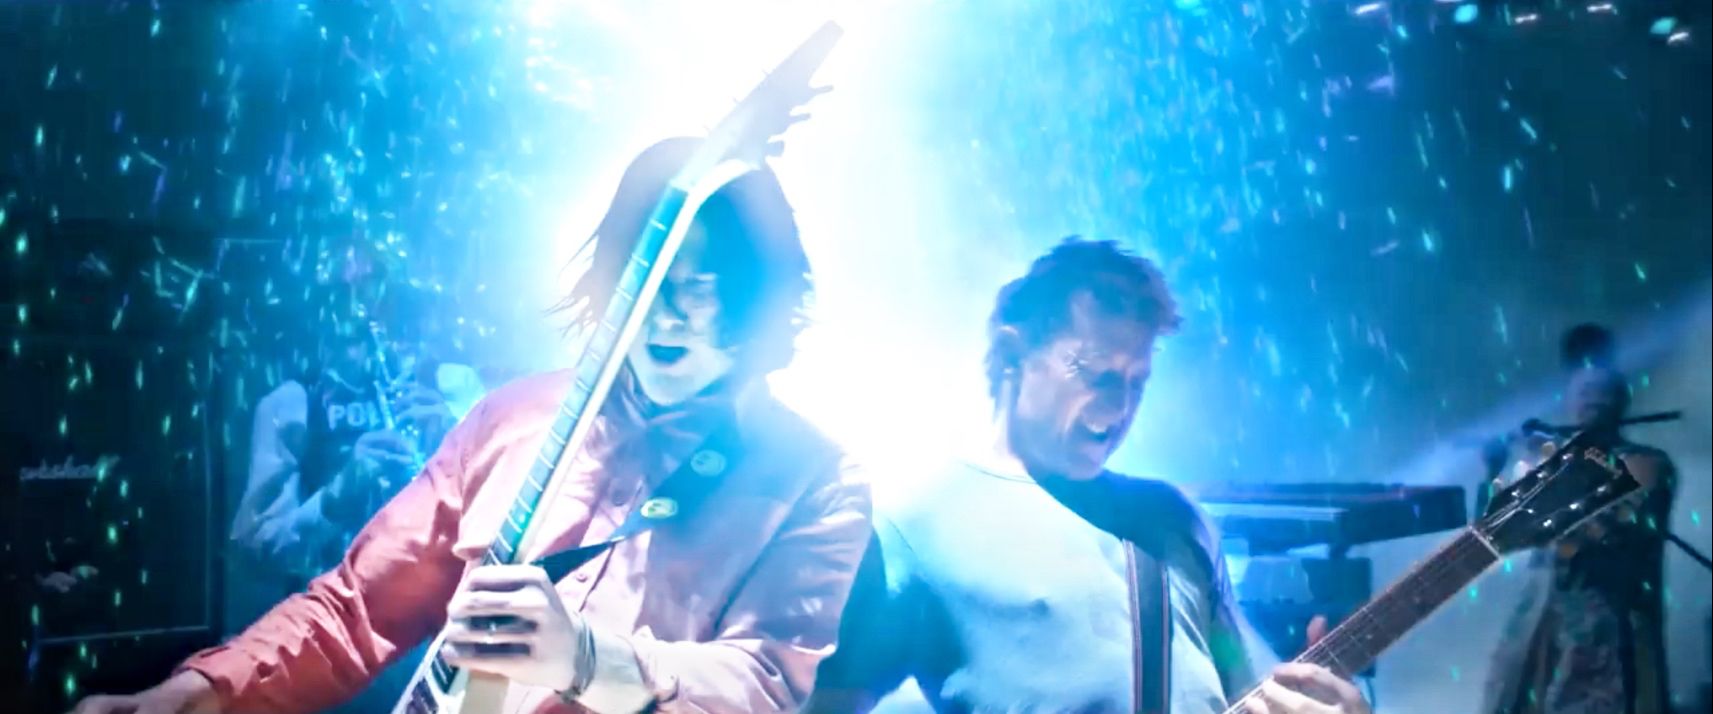 Bill and Ted Face The Music Trailer Image #3